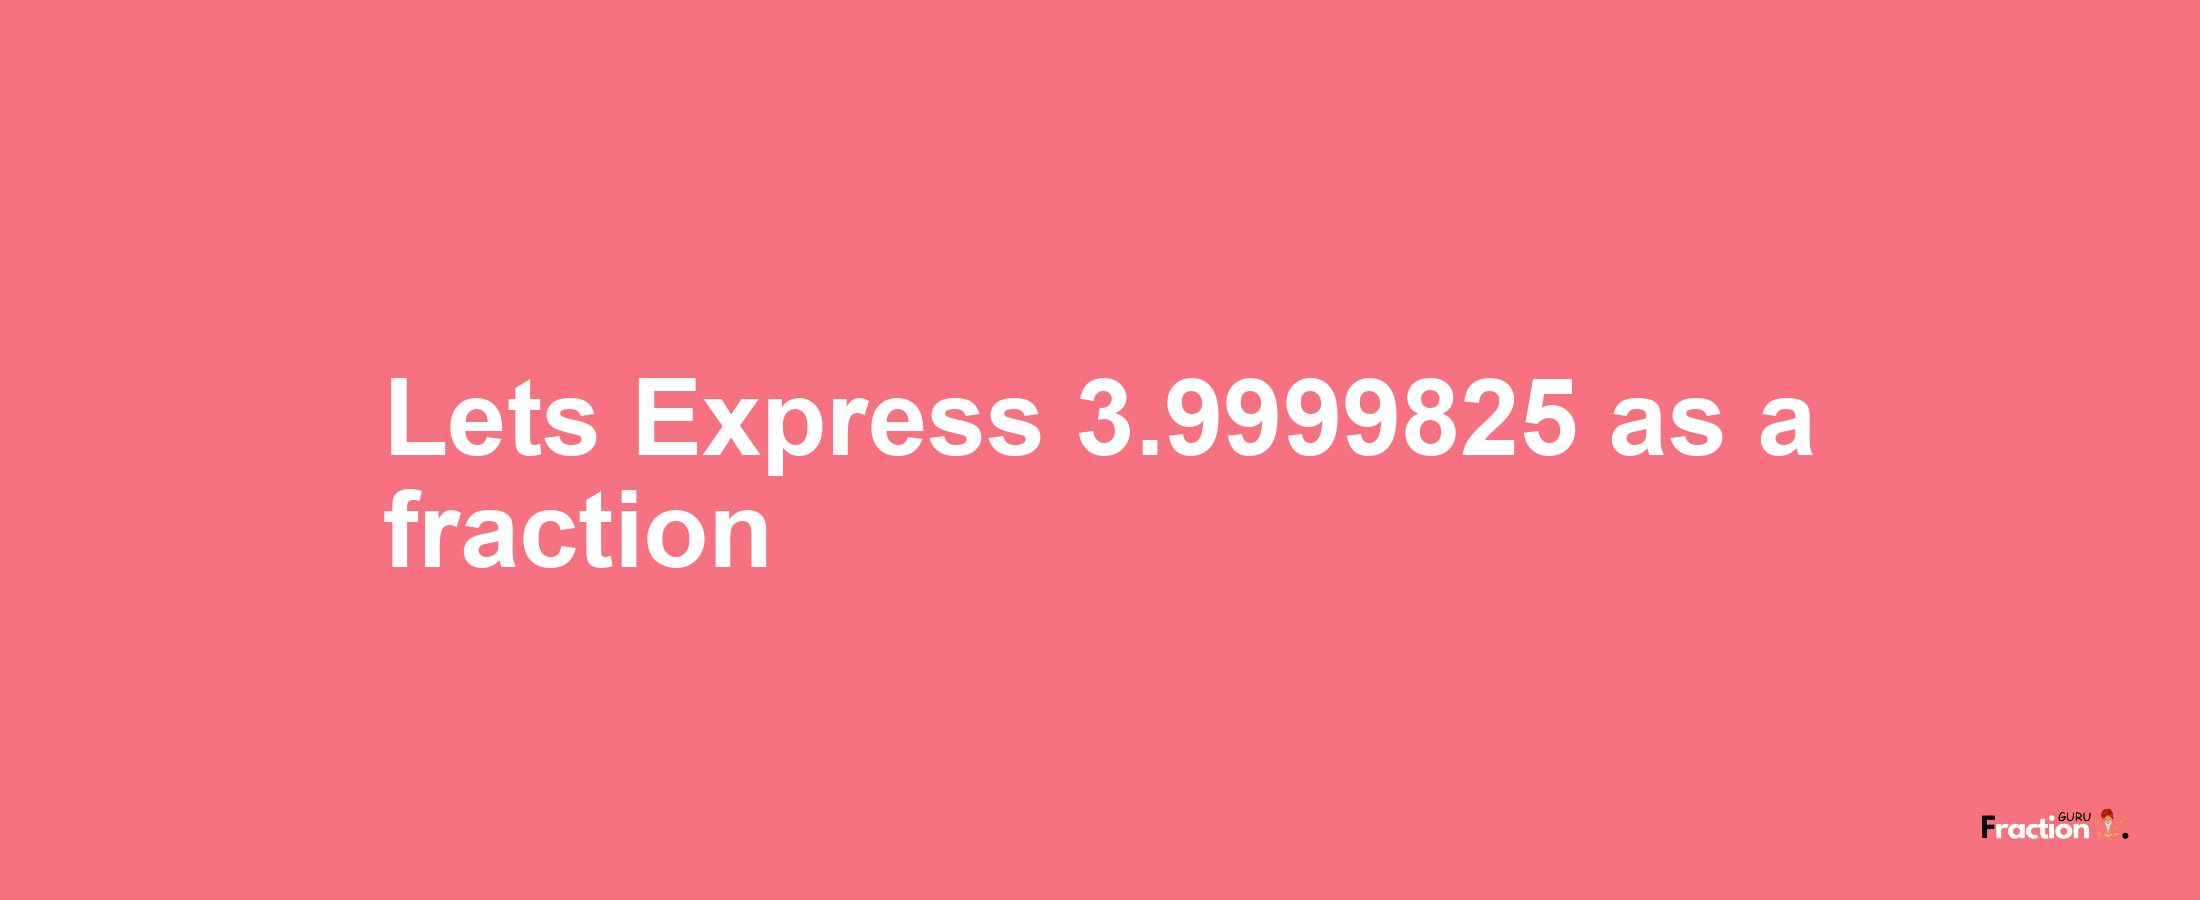 Lets Express 3.9999825 as afraction